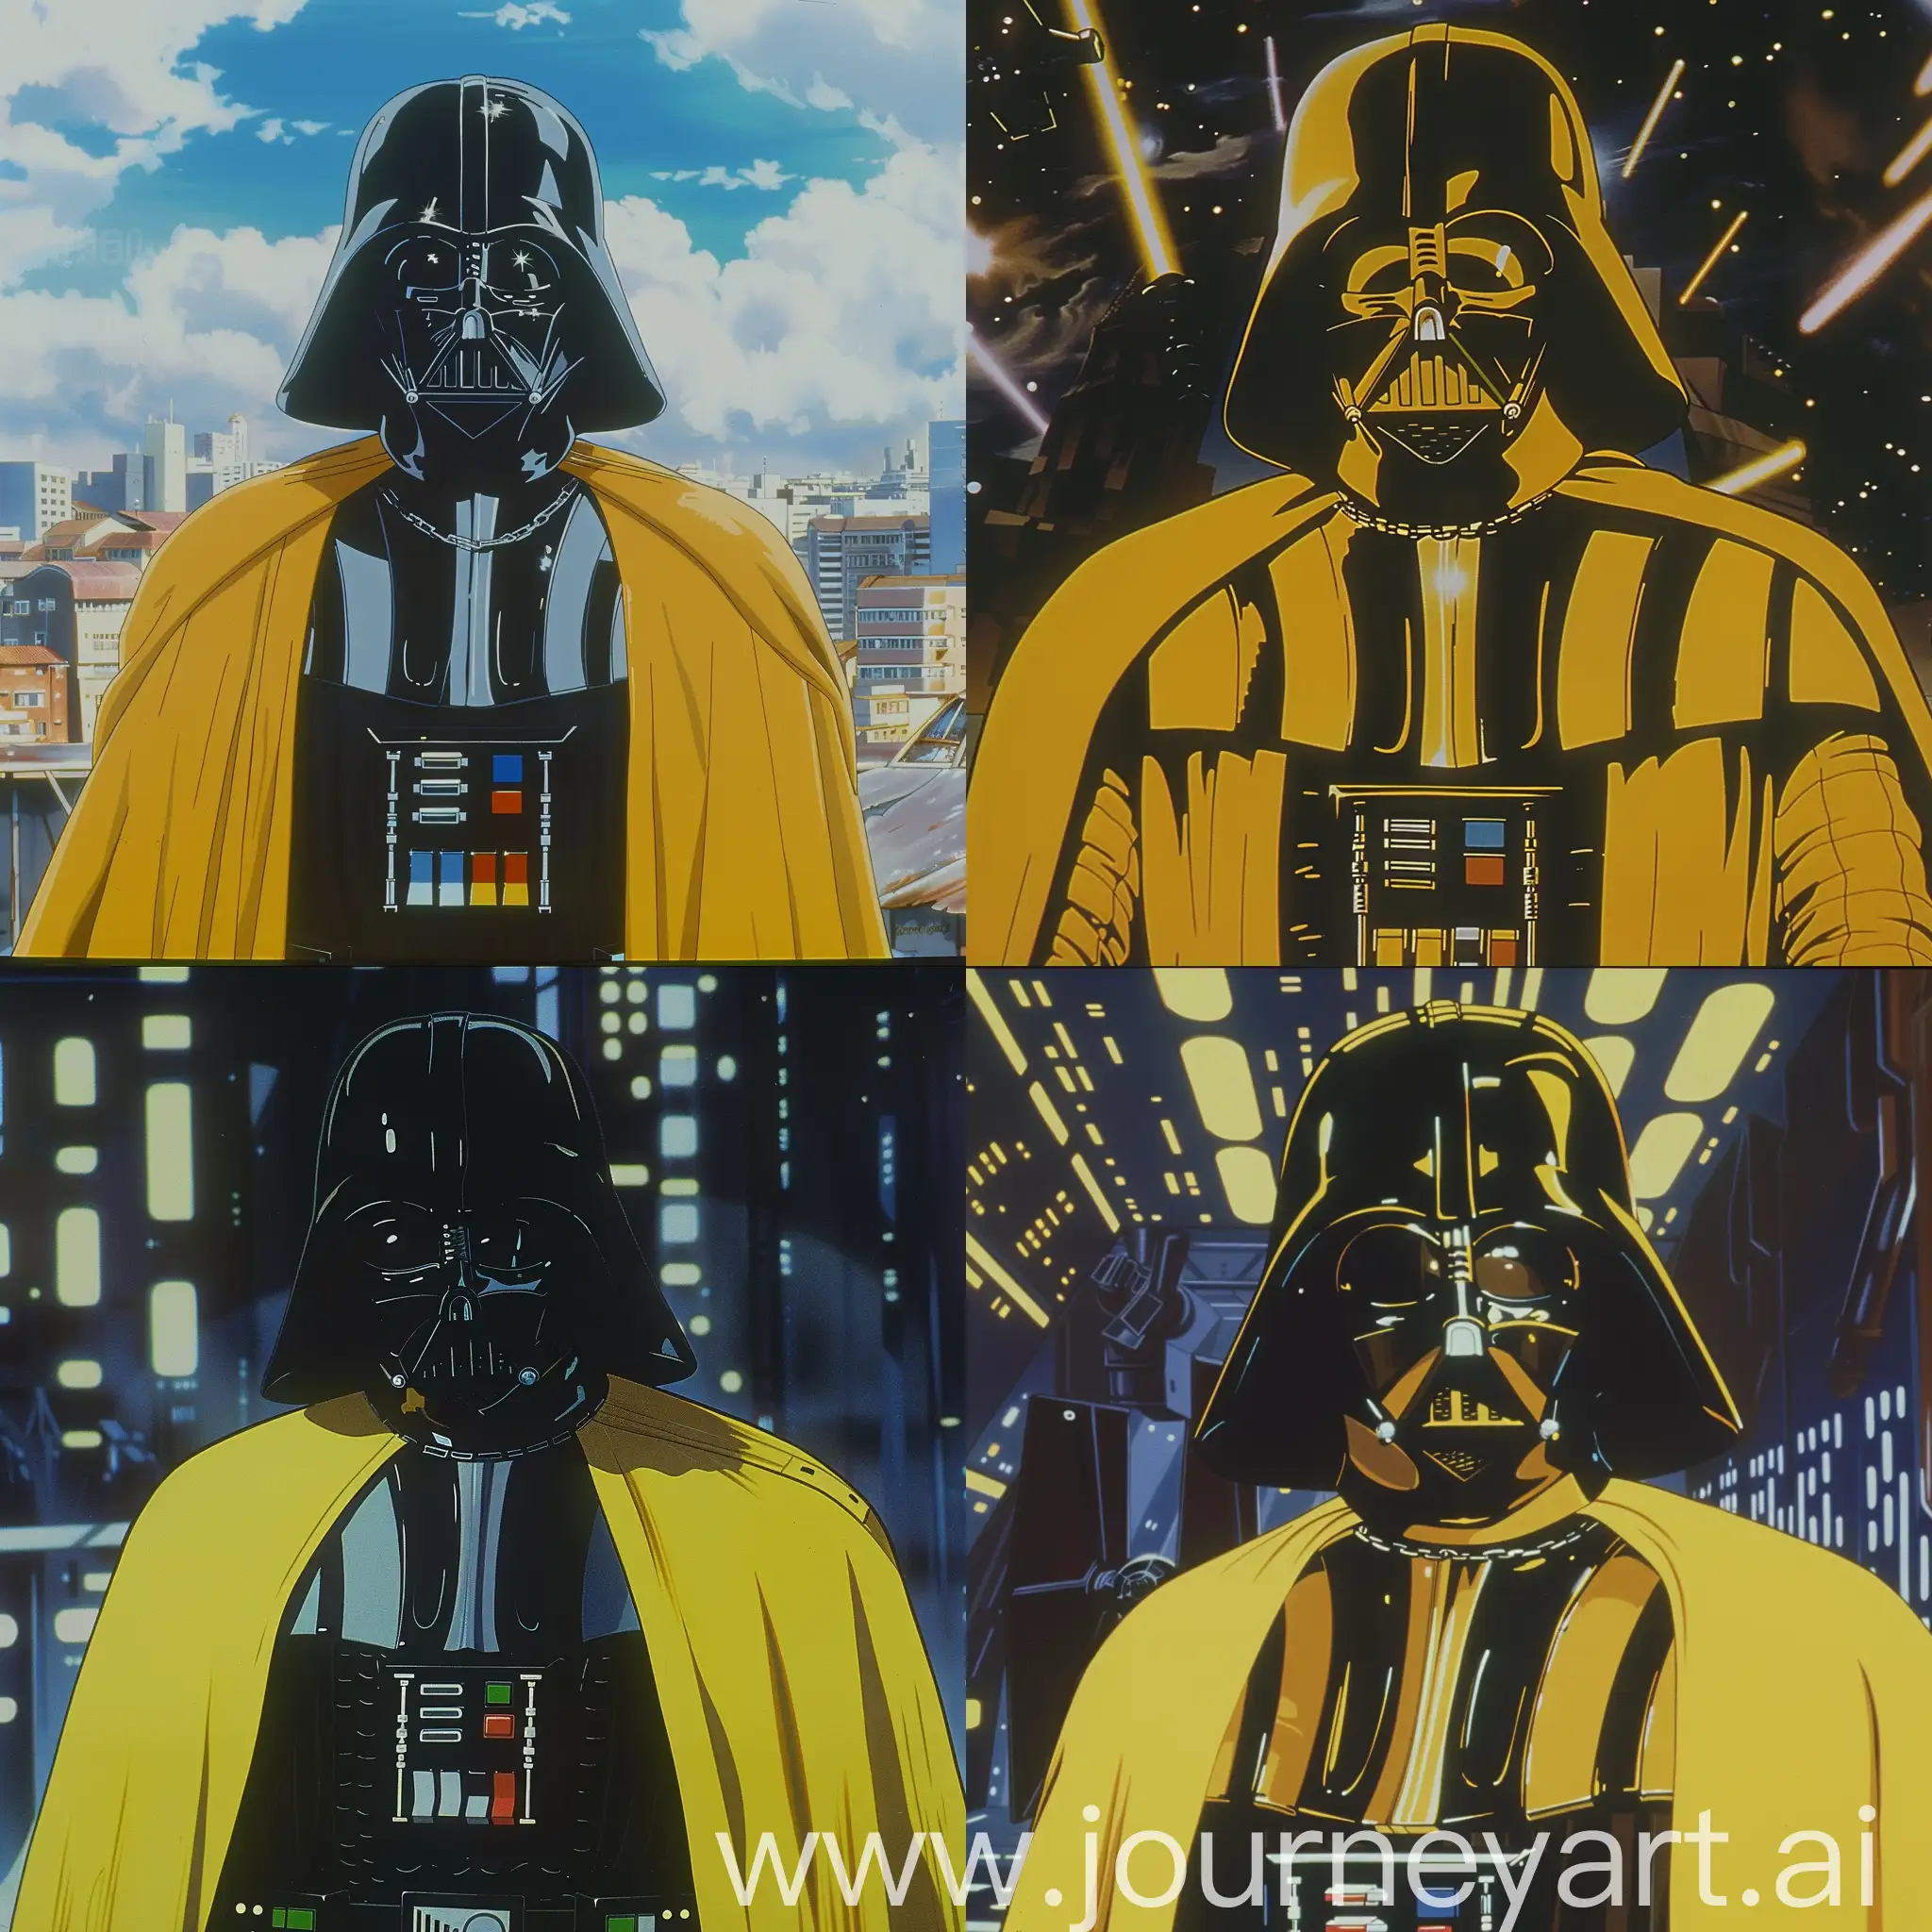 Darth Vader portrait in anime genre film, dvd screenshot from anime film, yellow costume and 80s anime film composition